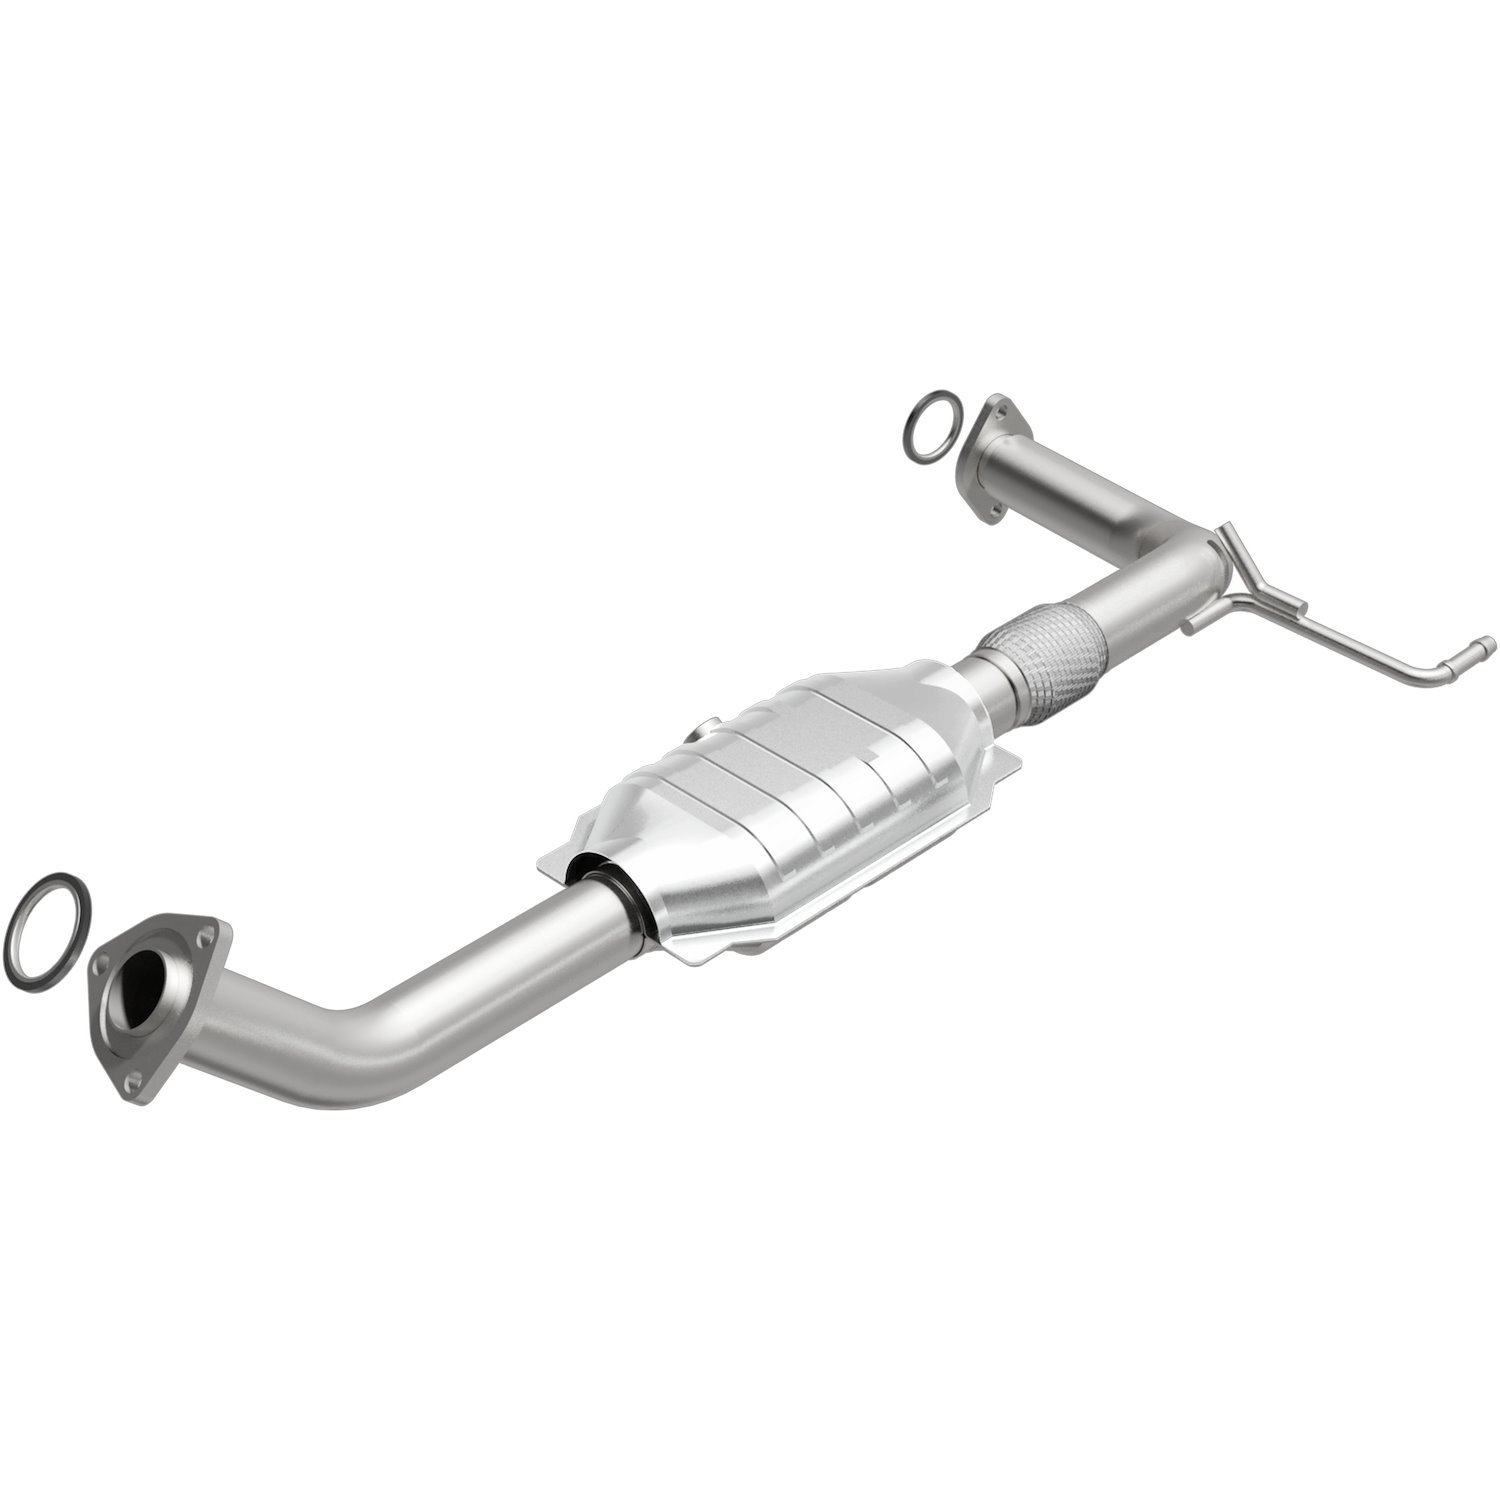 2005-2006 Toyota Tundra HM Grade Federal / EPA Compliant Direct-Fit Catalytic Converter